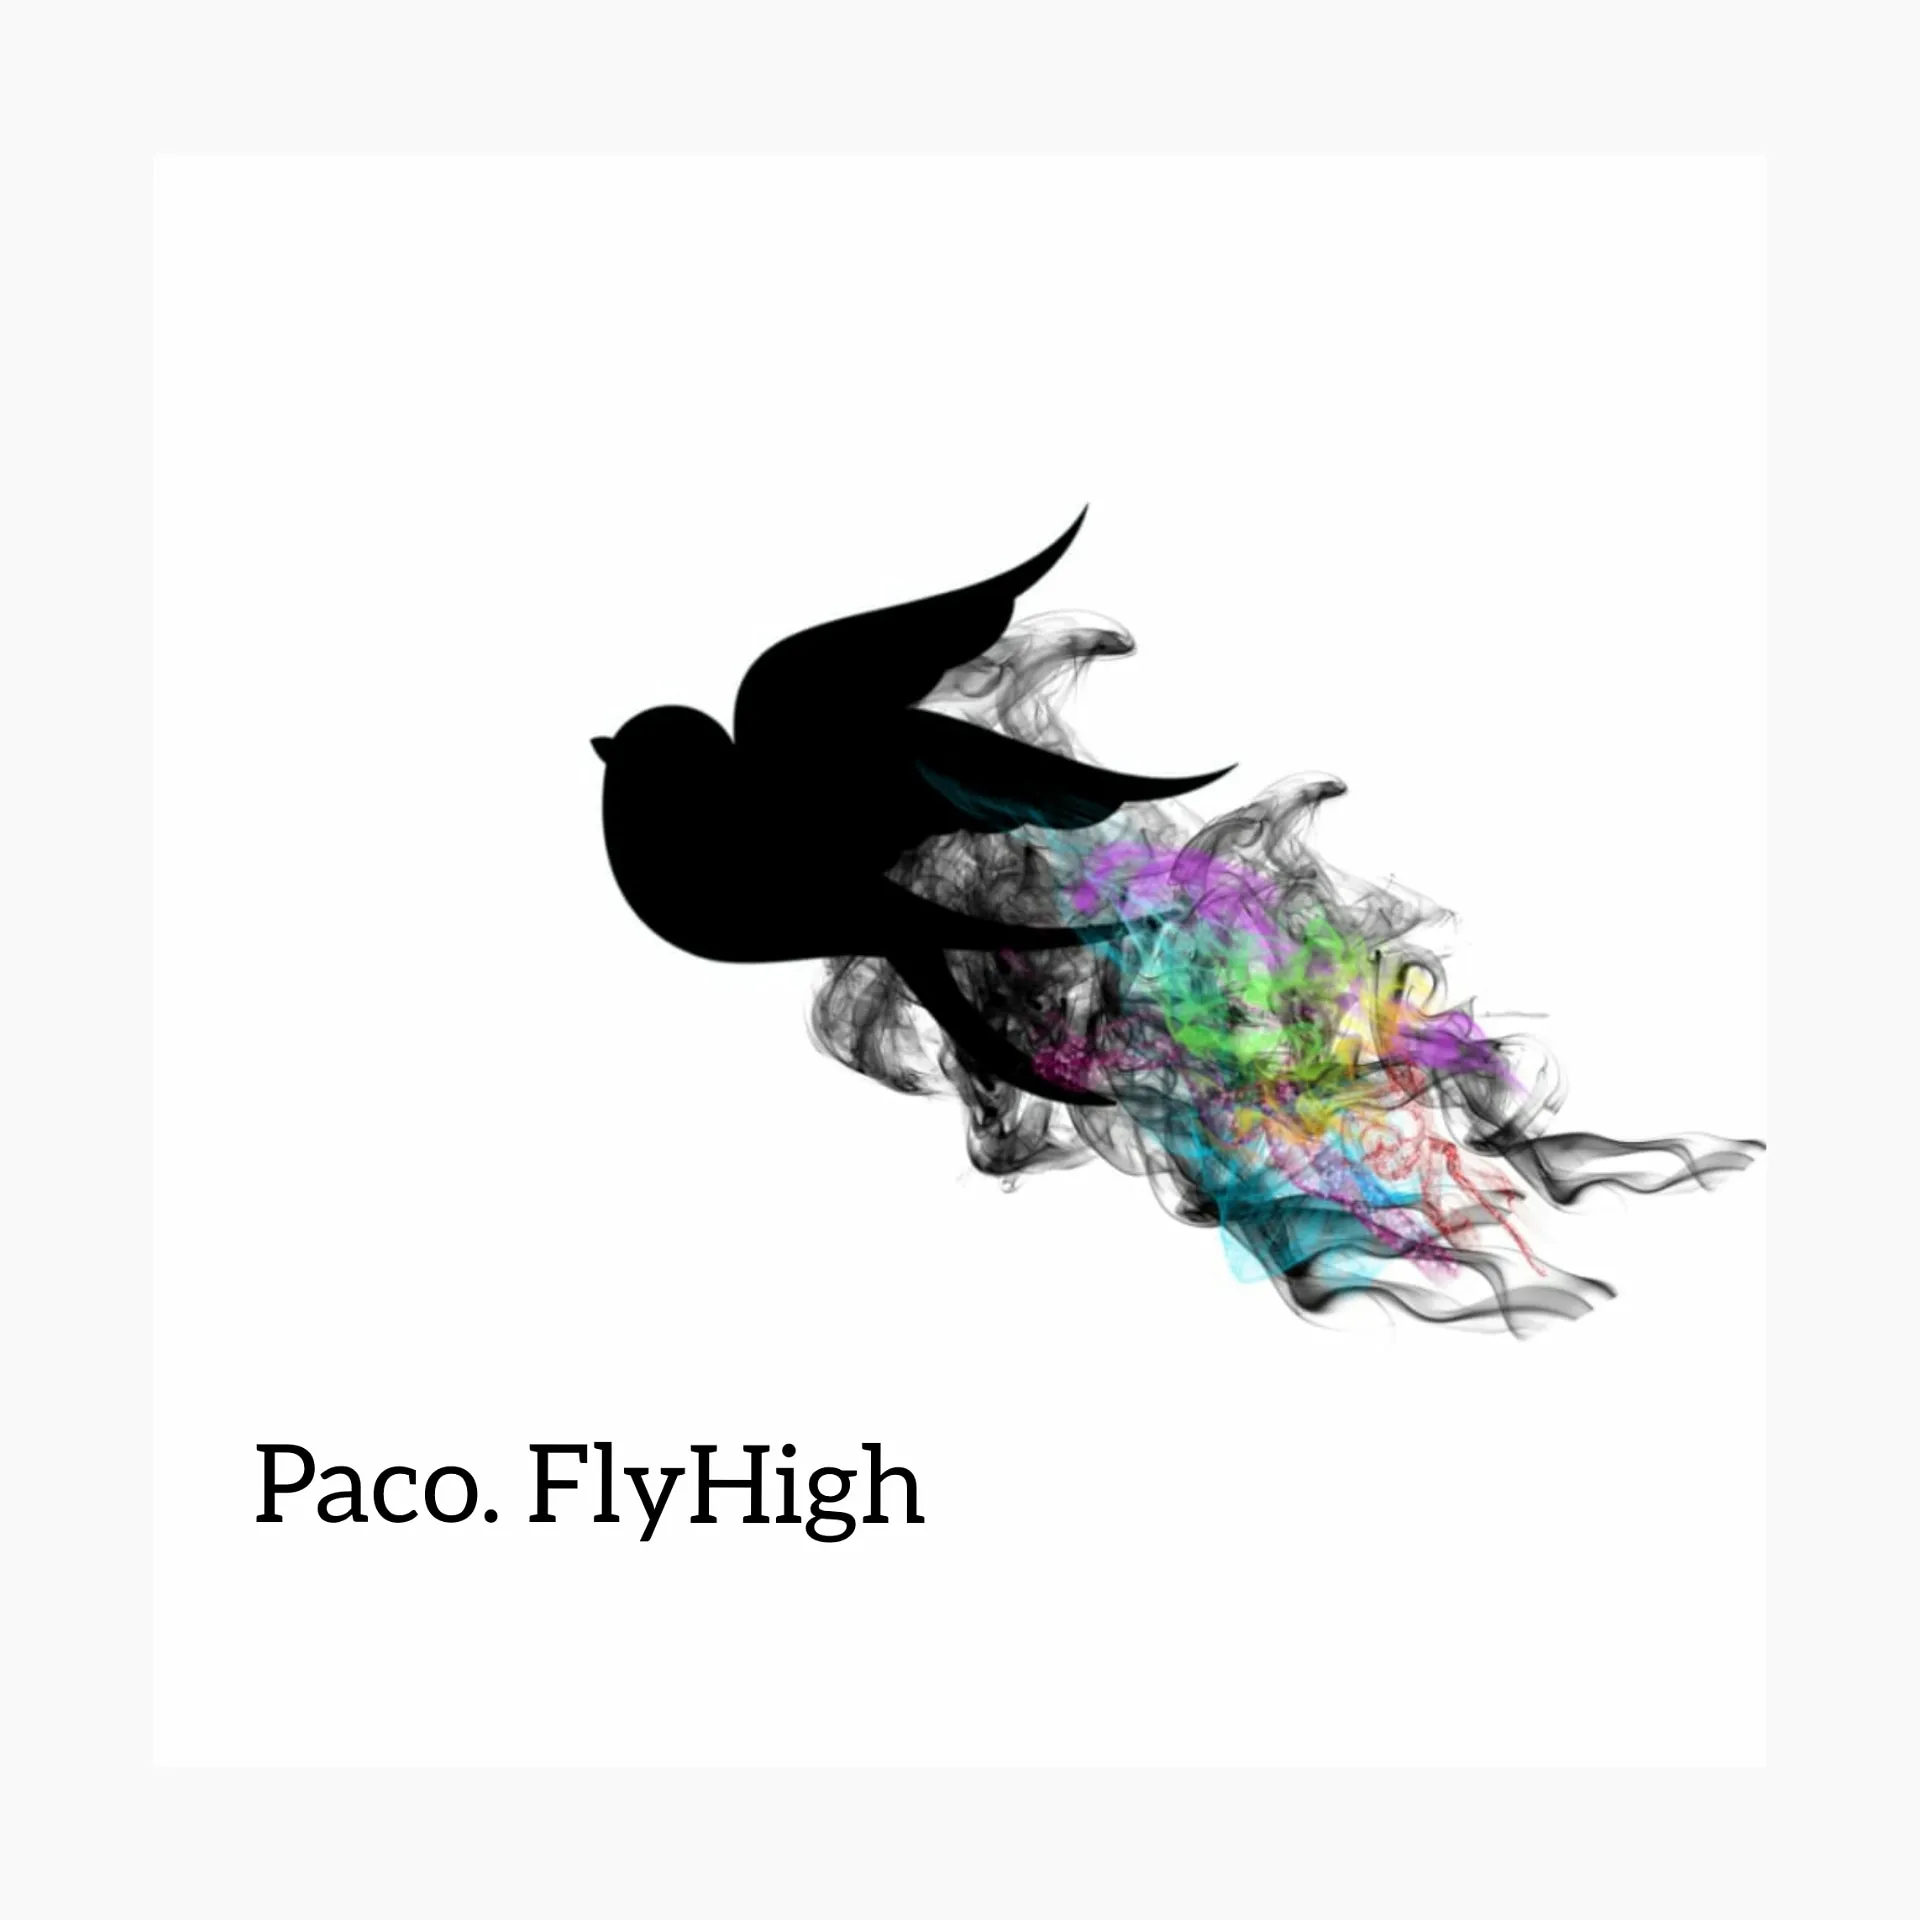 Paco. FlyHigh